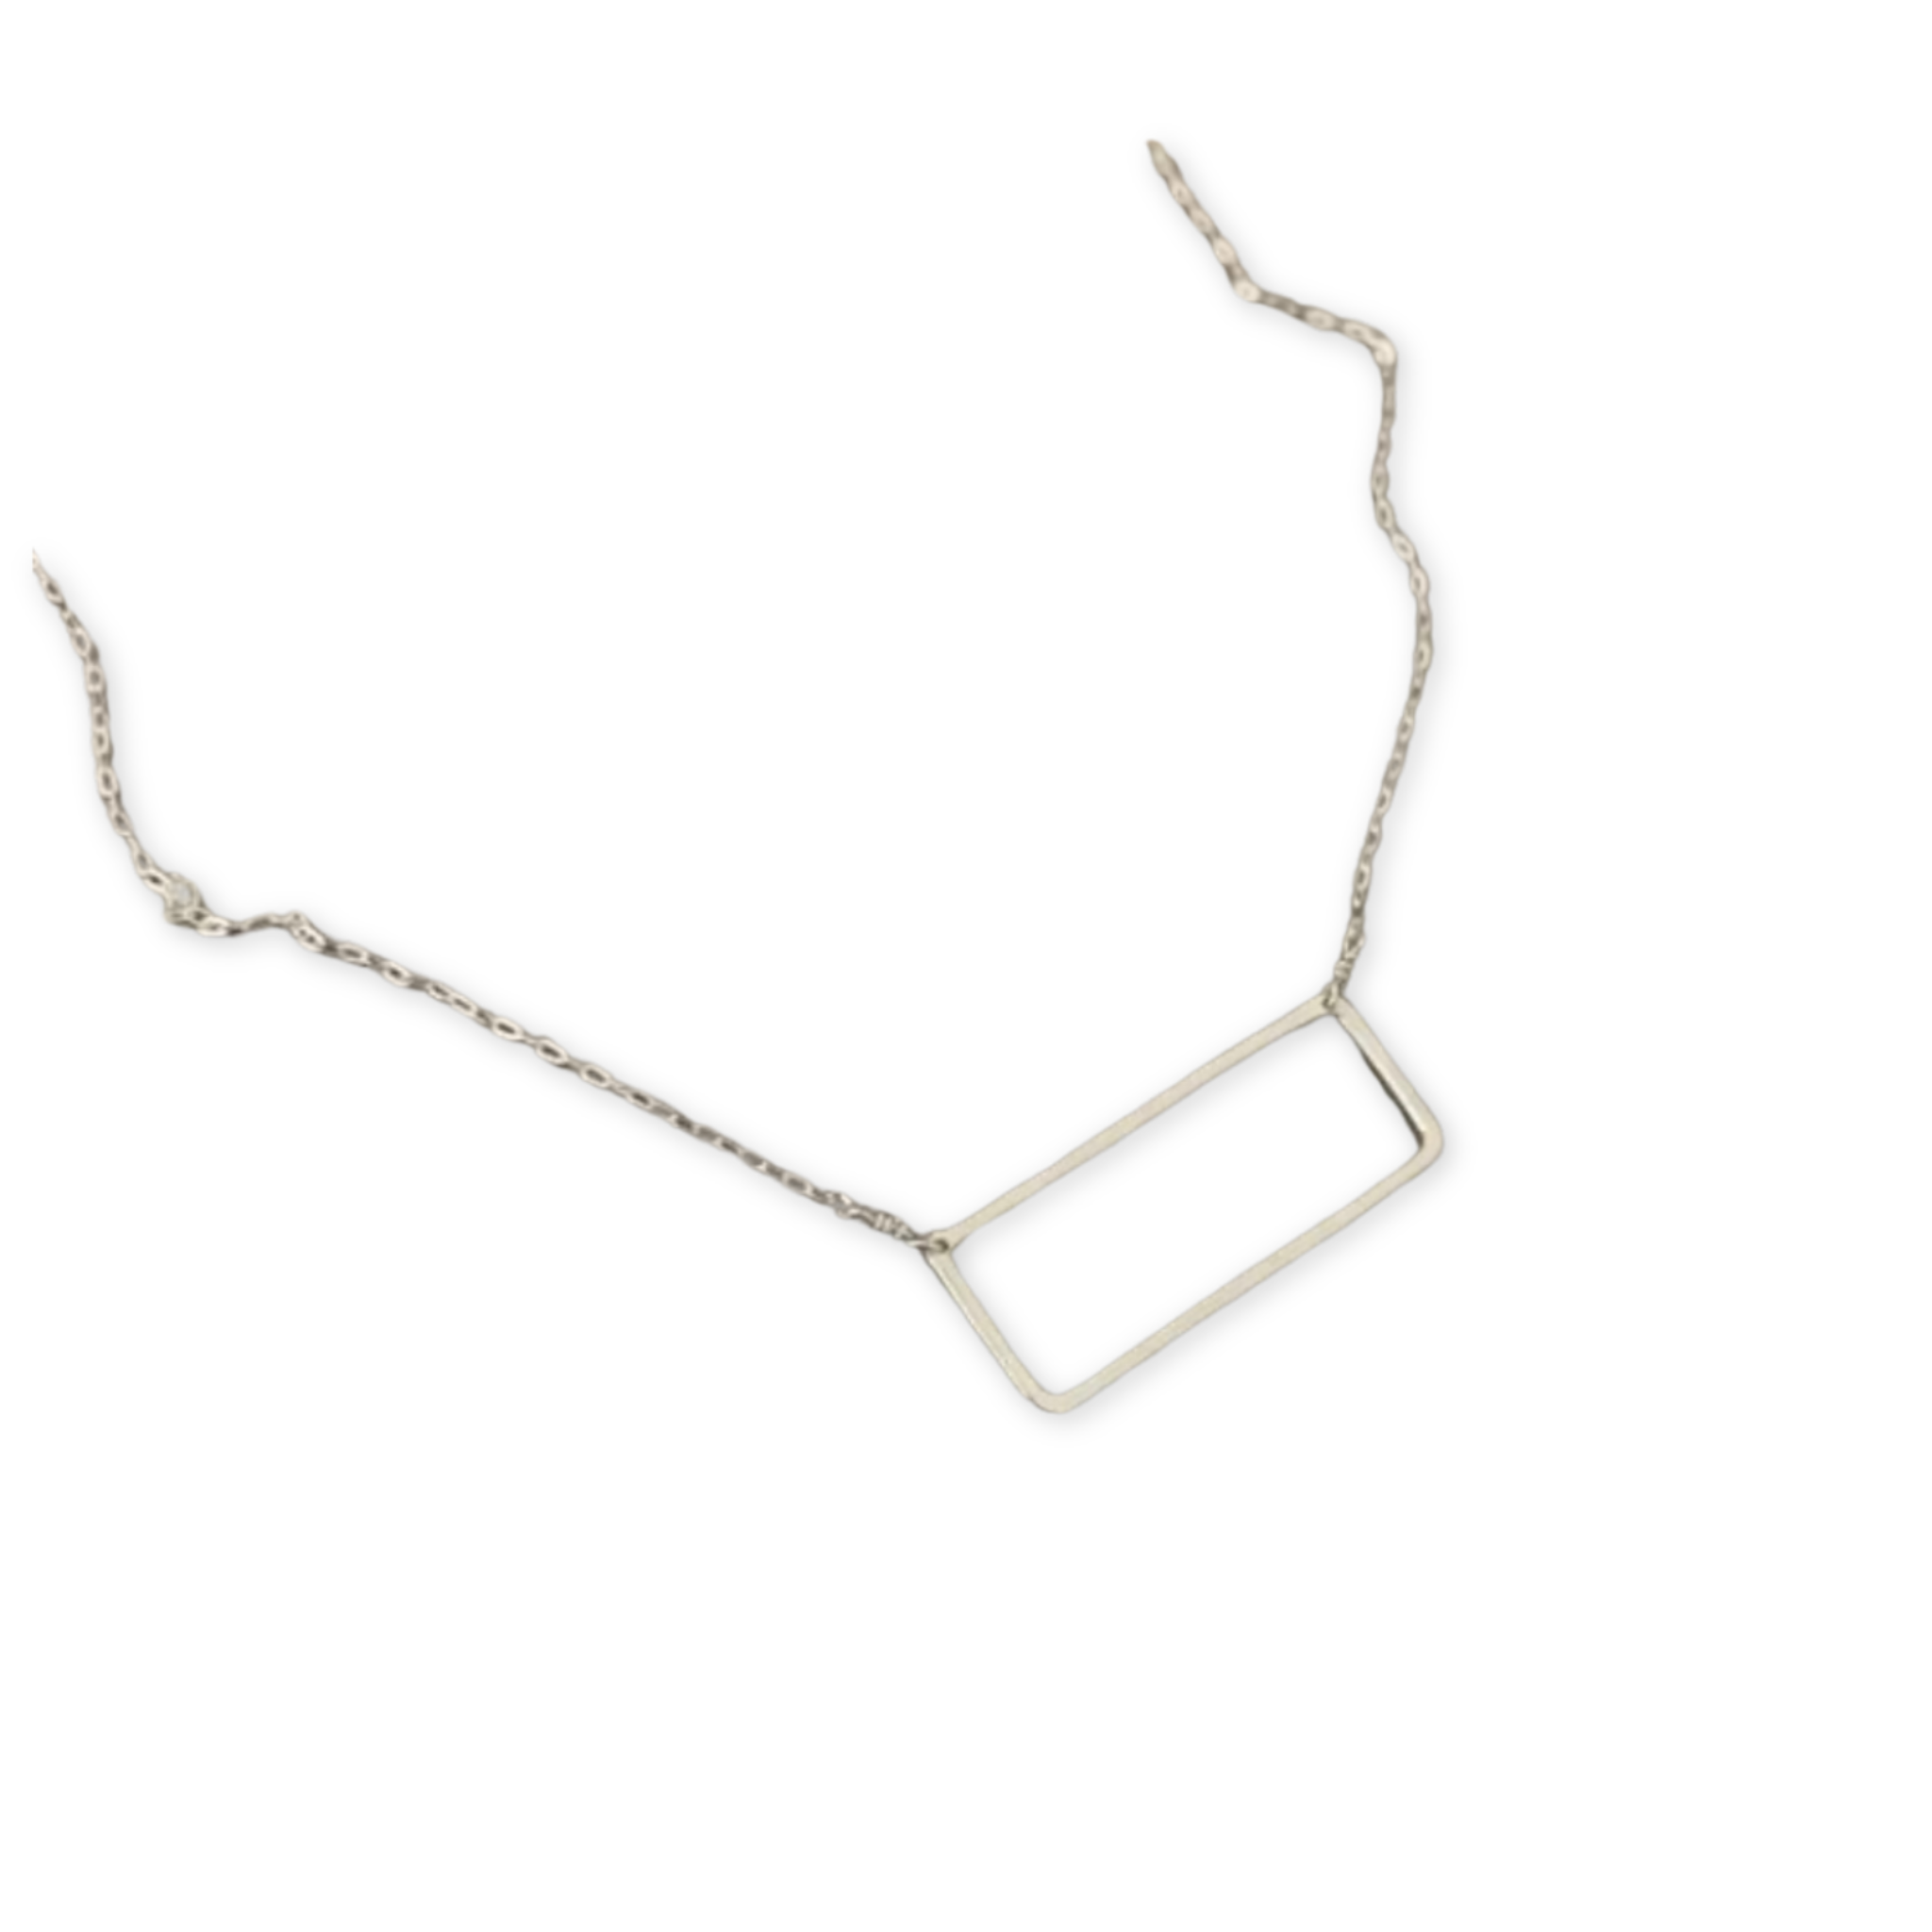 delicate open rectangle pendant hanging from a thin necklace chain